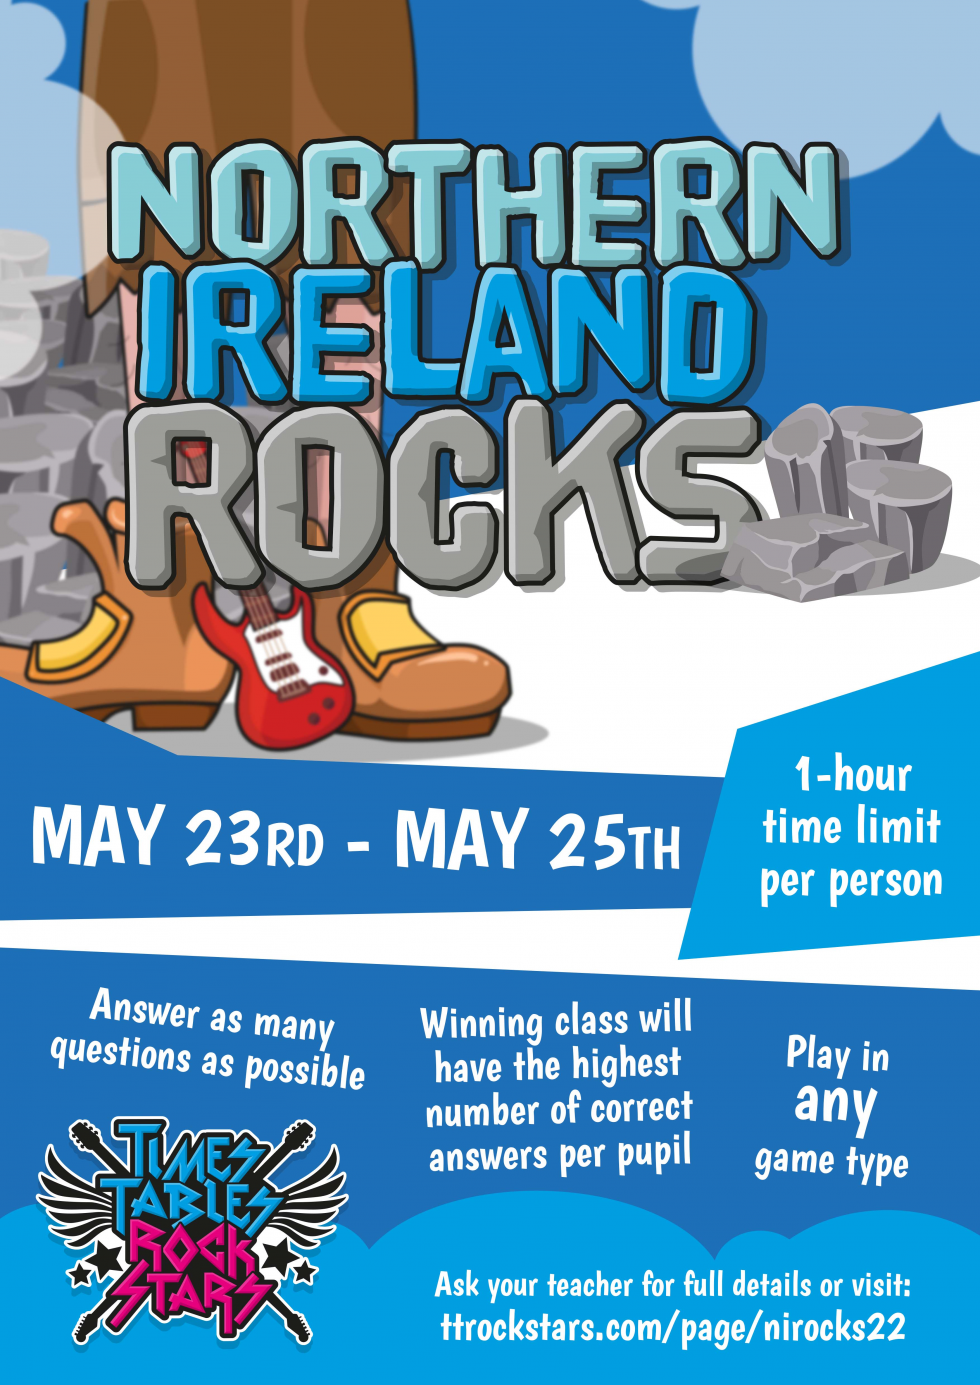 Download your Northern Ireland Rocks Poster now.